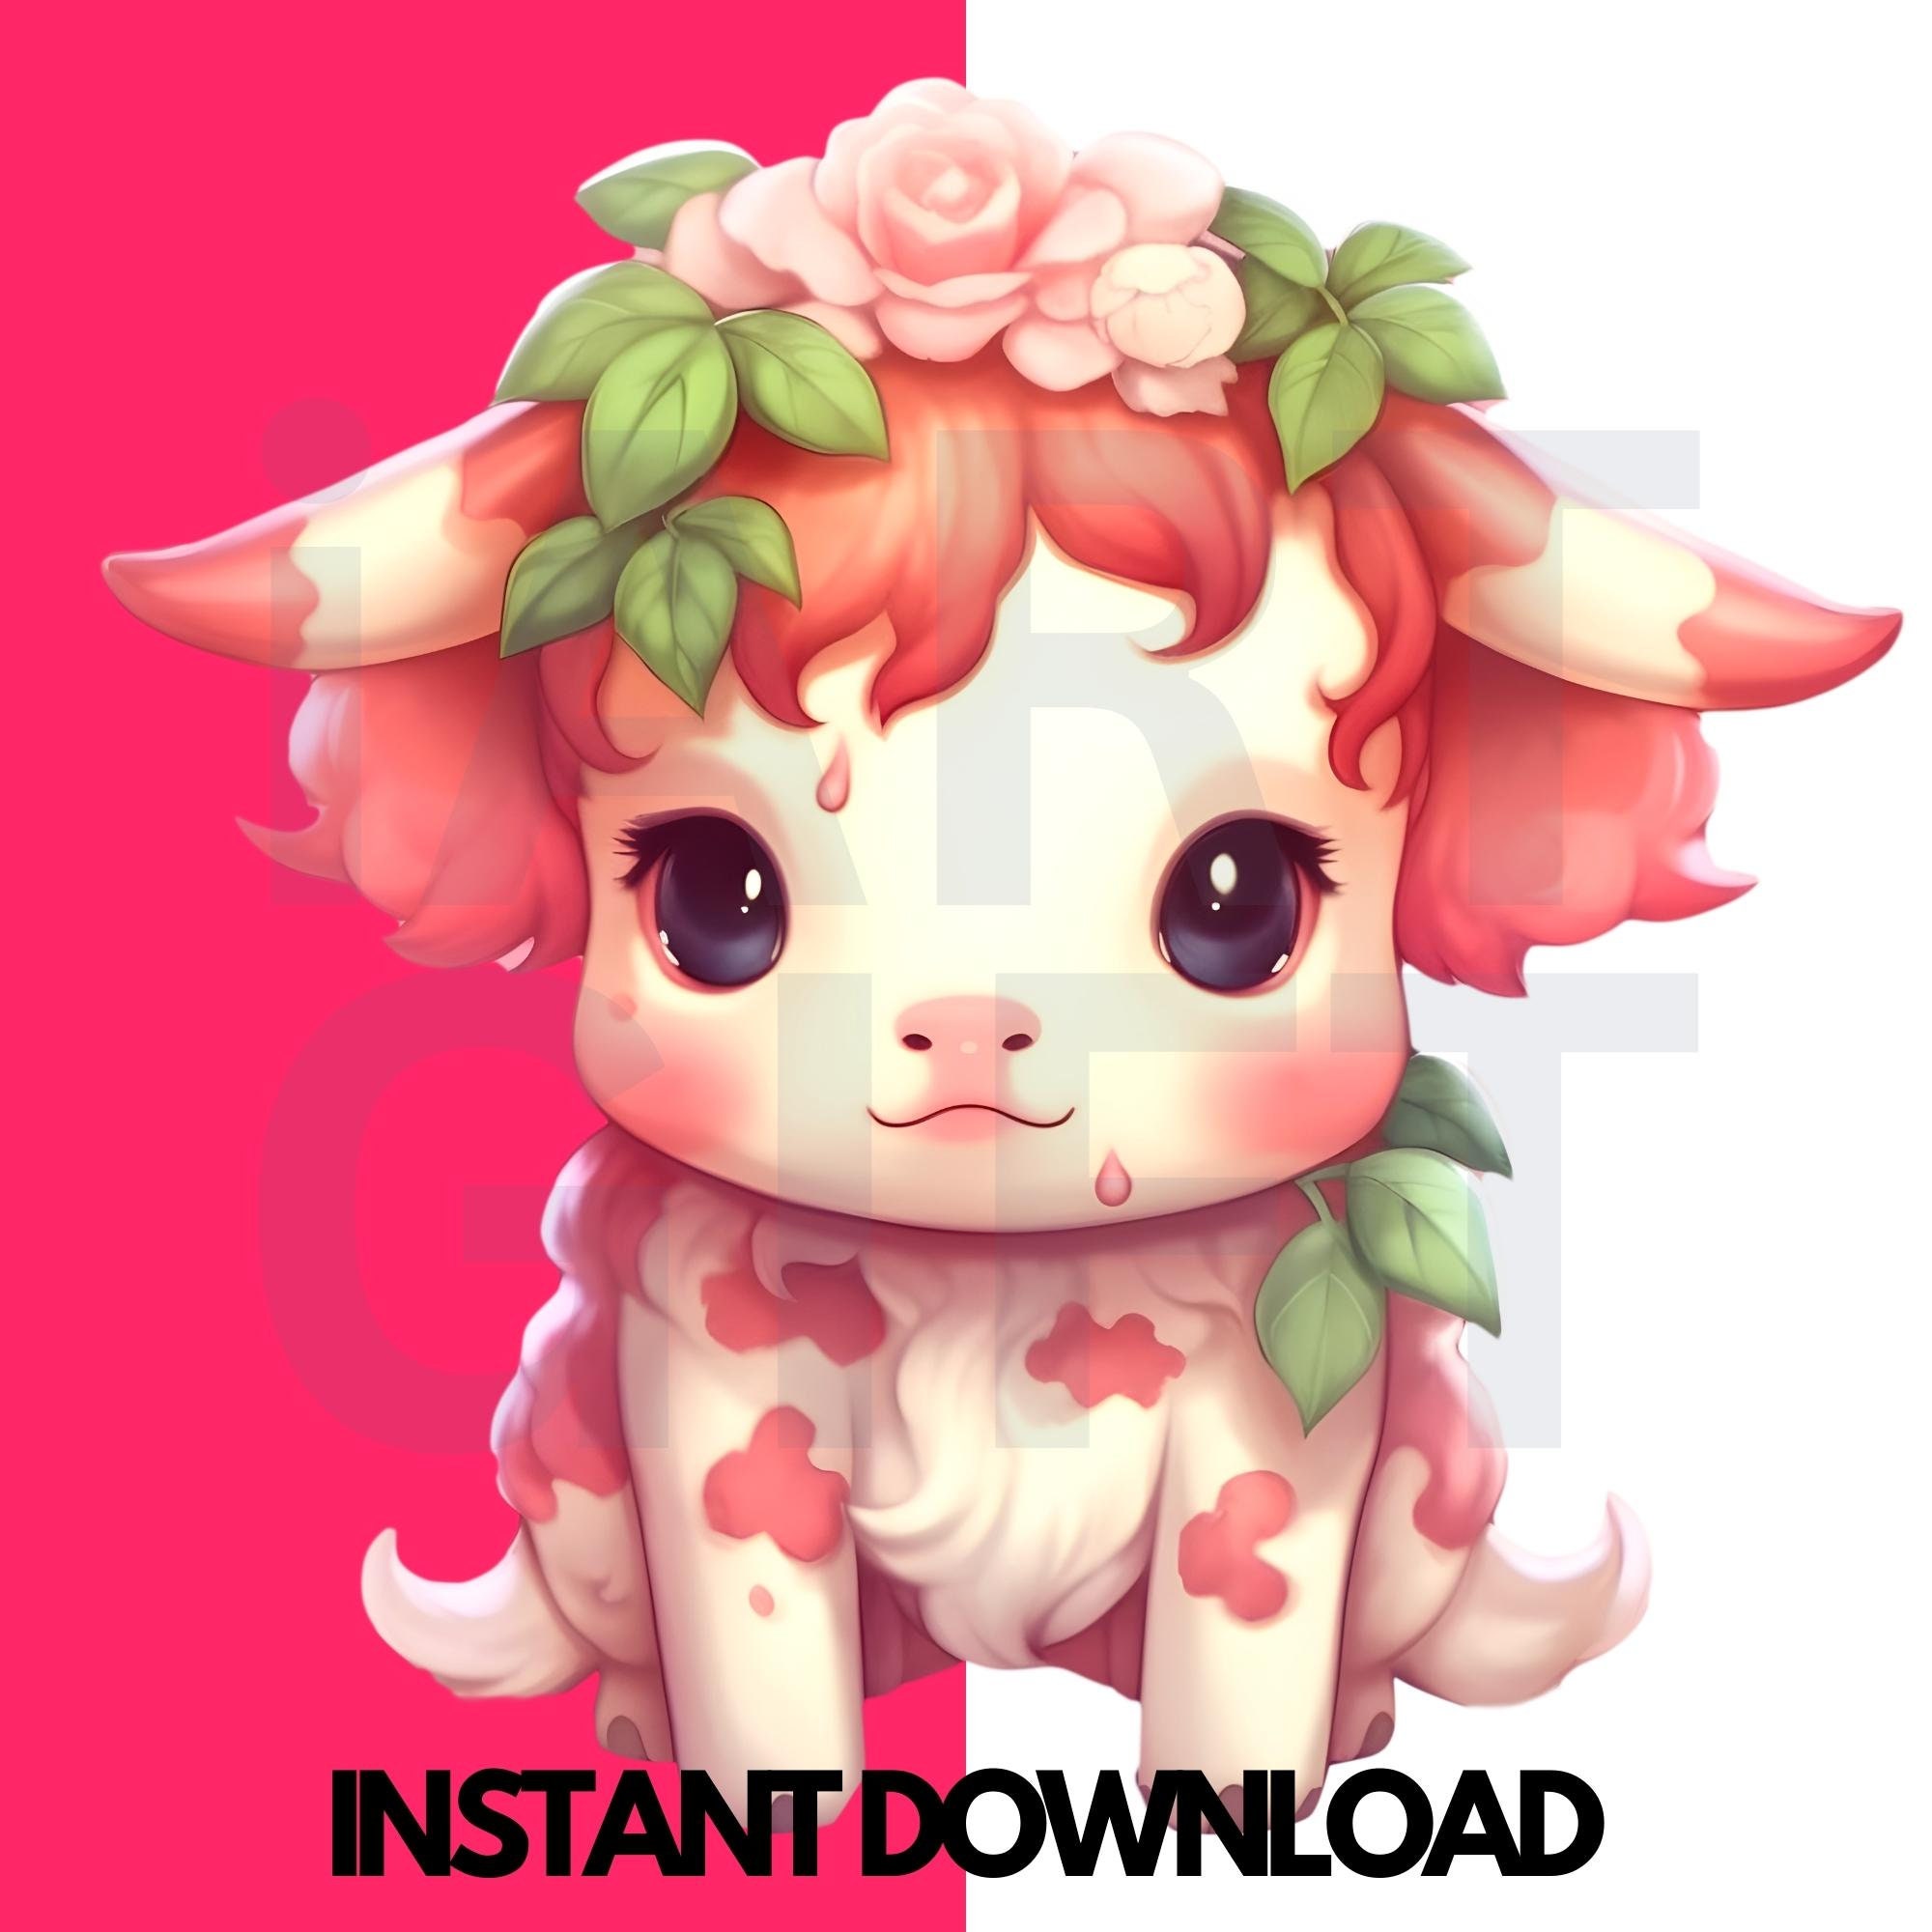 2,877 Strawberry Cow Images, Stock Photos, 3D objects, & Vectors